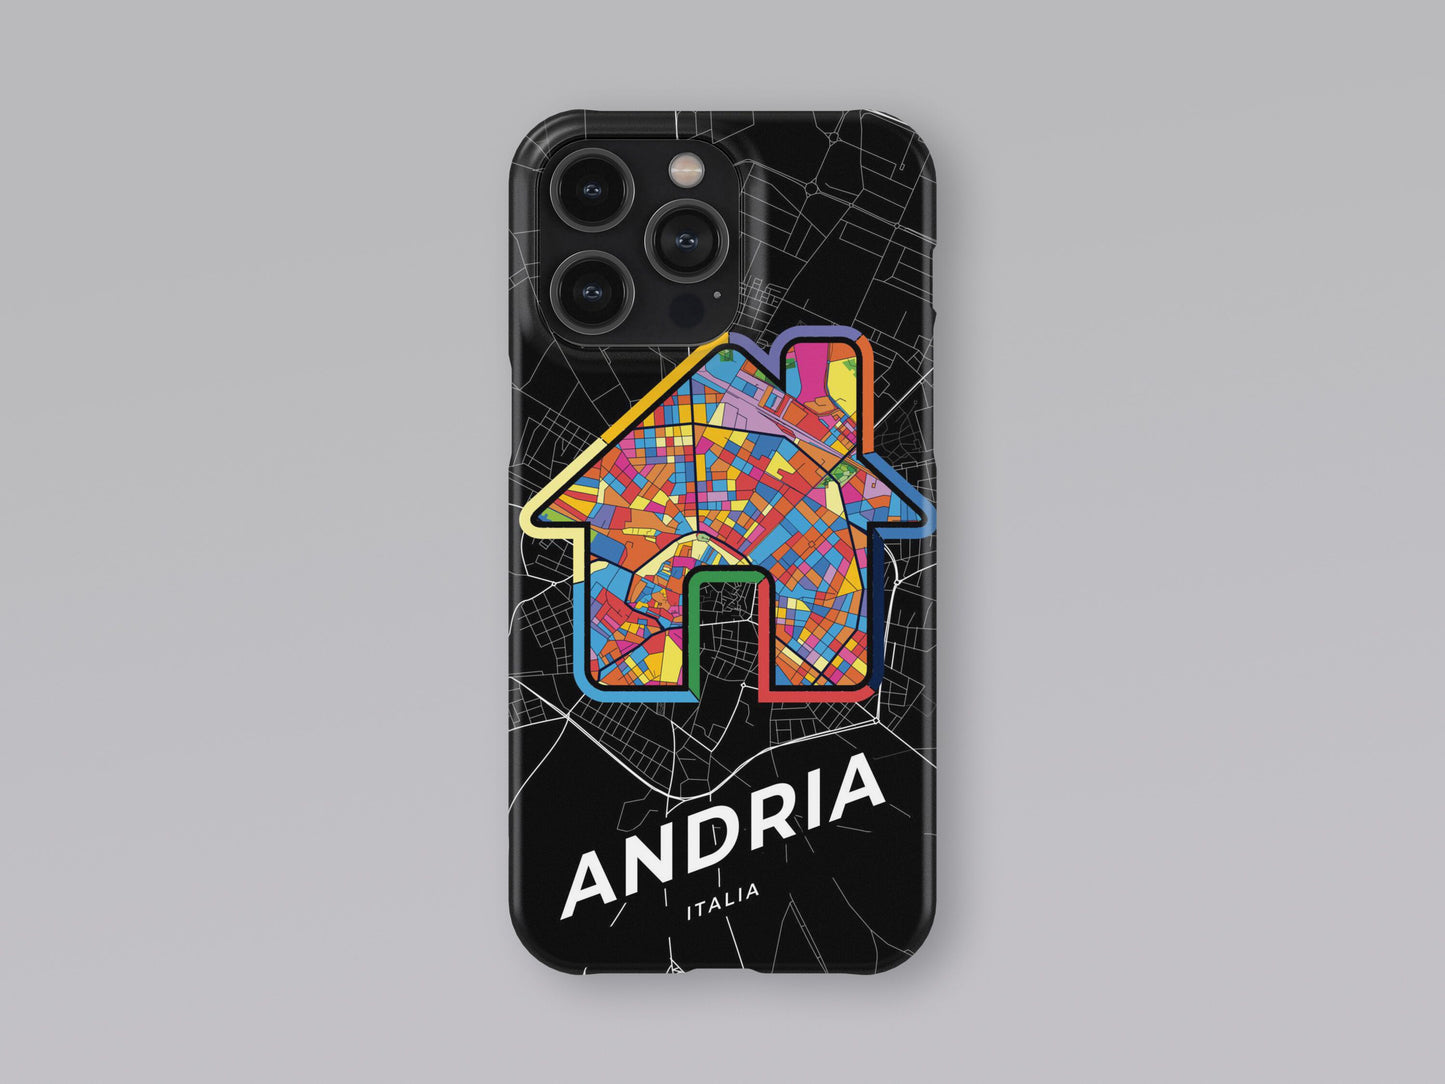 Andria Italy slim phone case with colorful icon. Birthday, wedding or housewarming gift. Couple match cases. 3